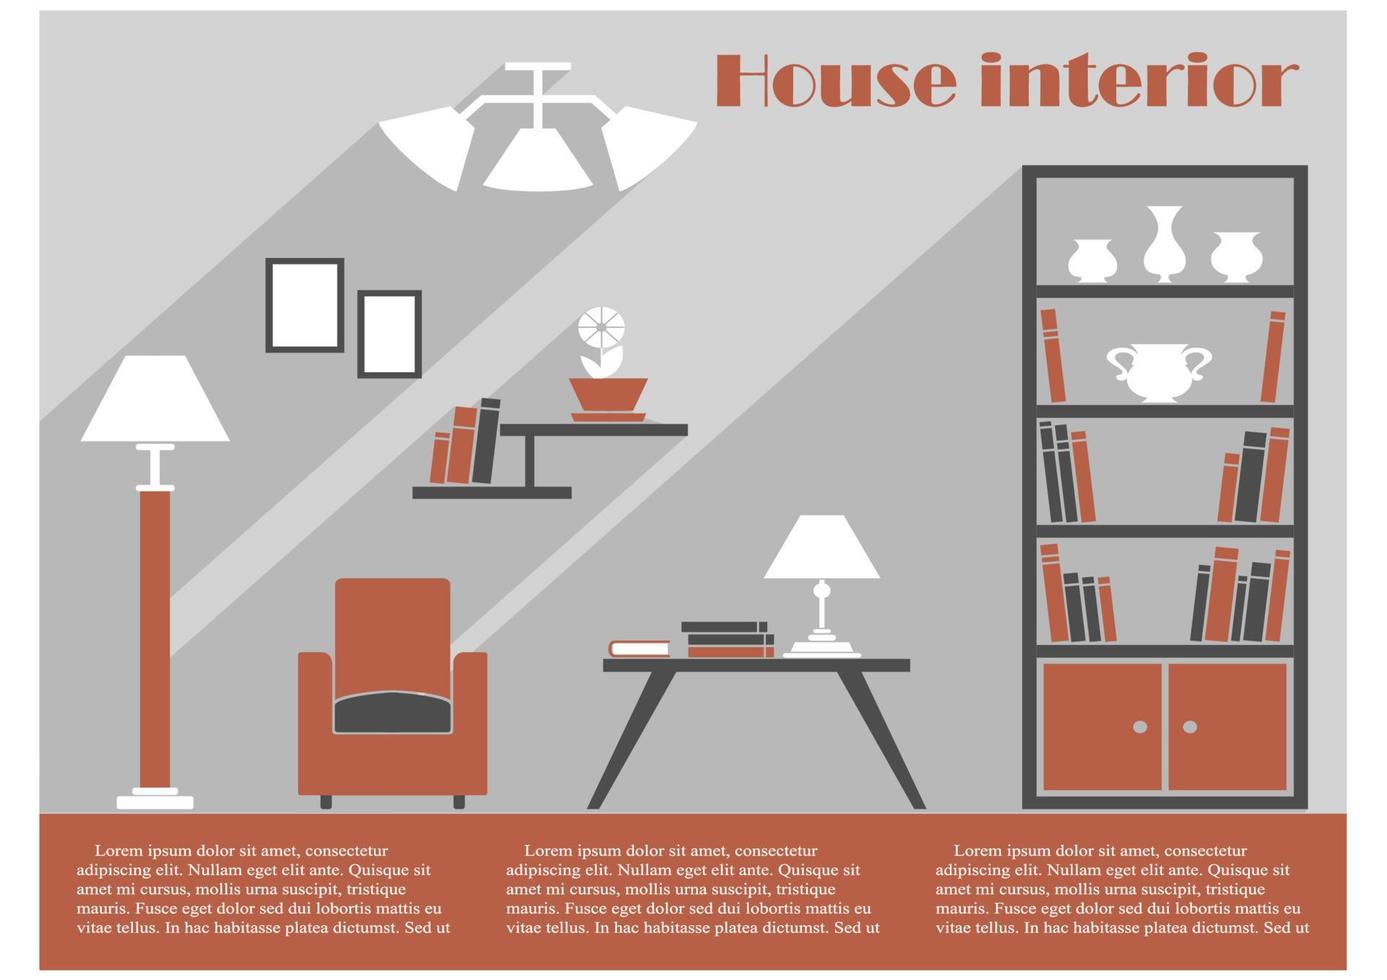 House interior design infographic template vector